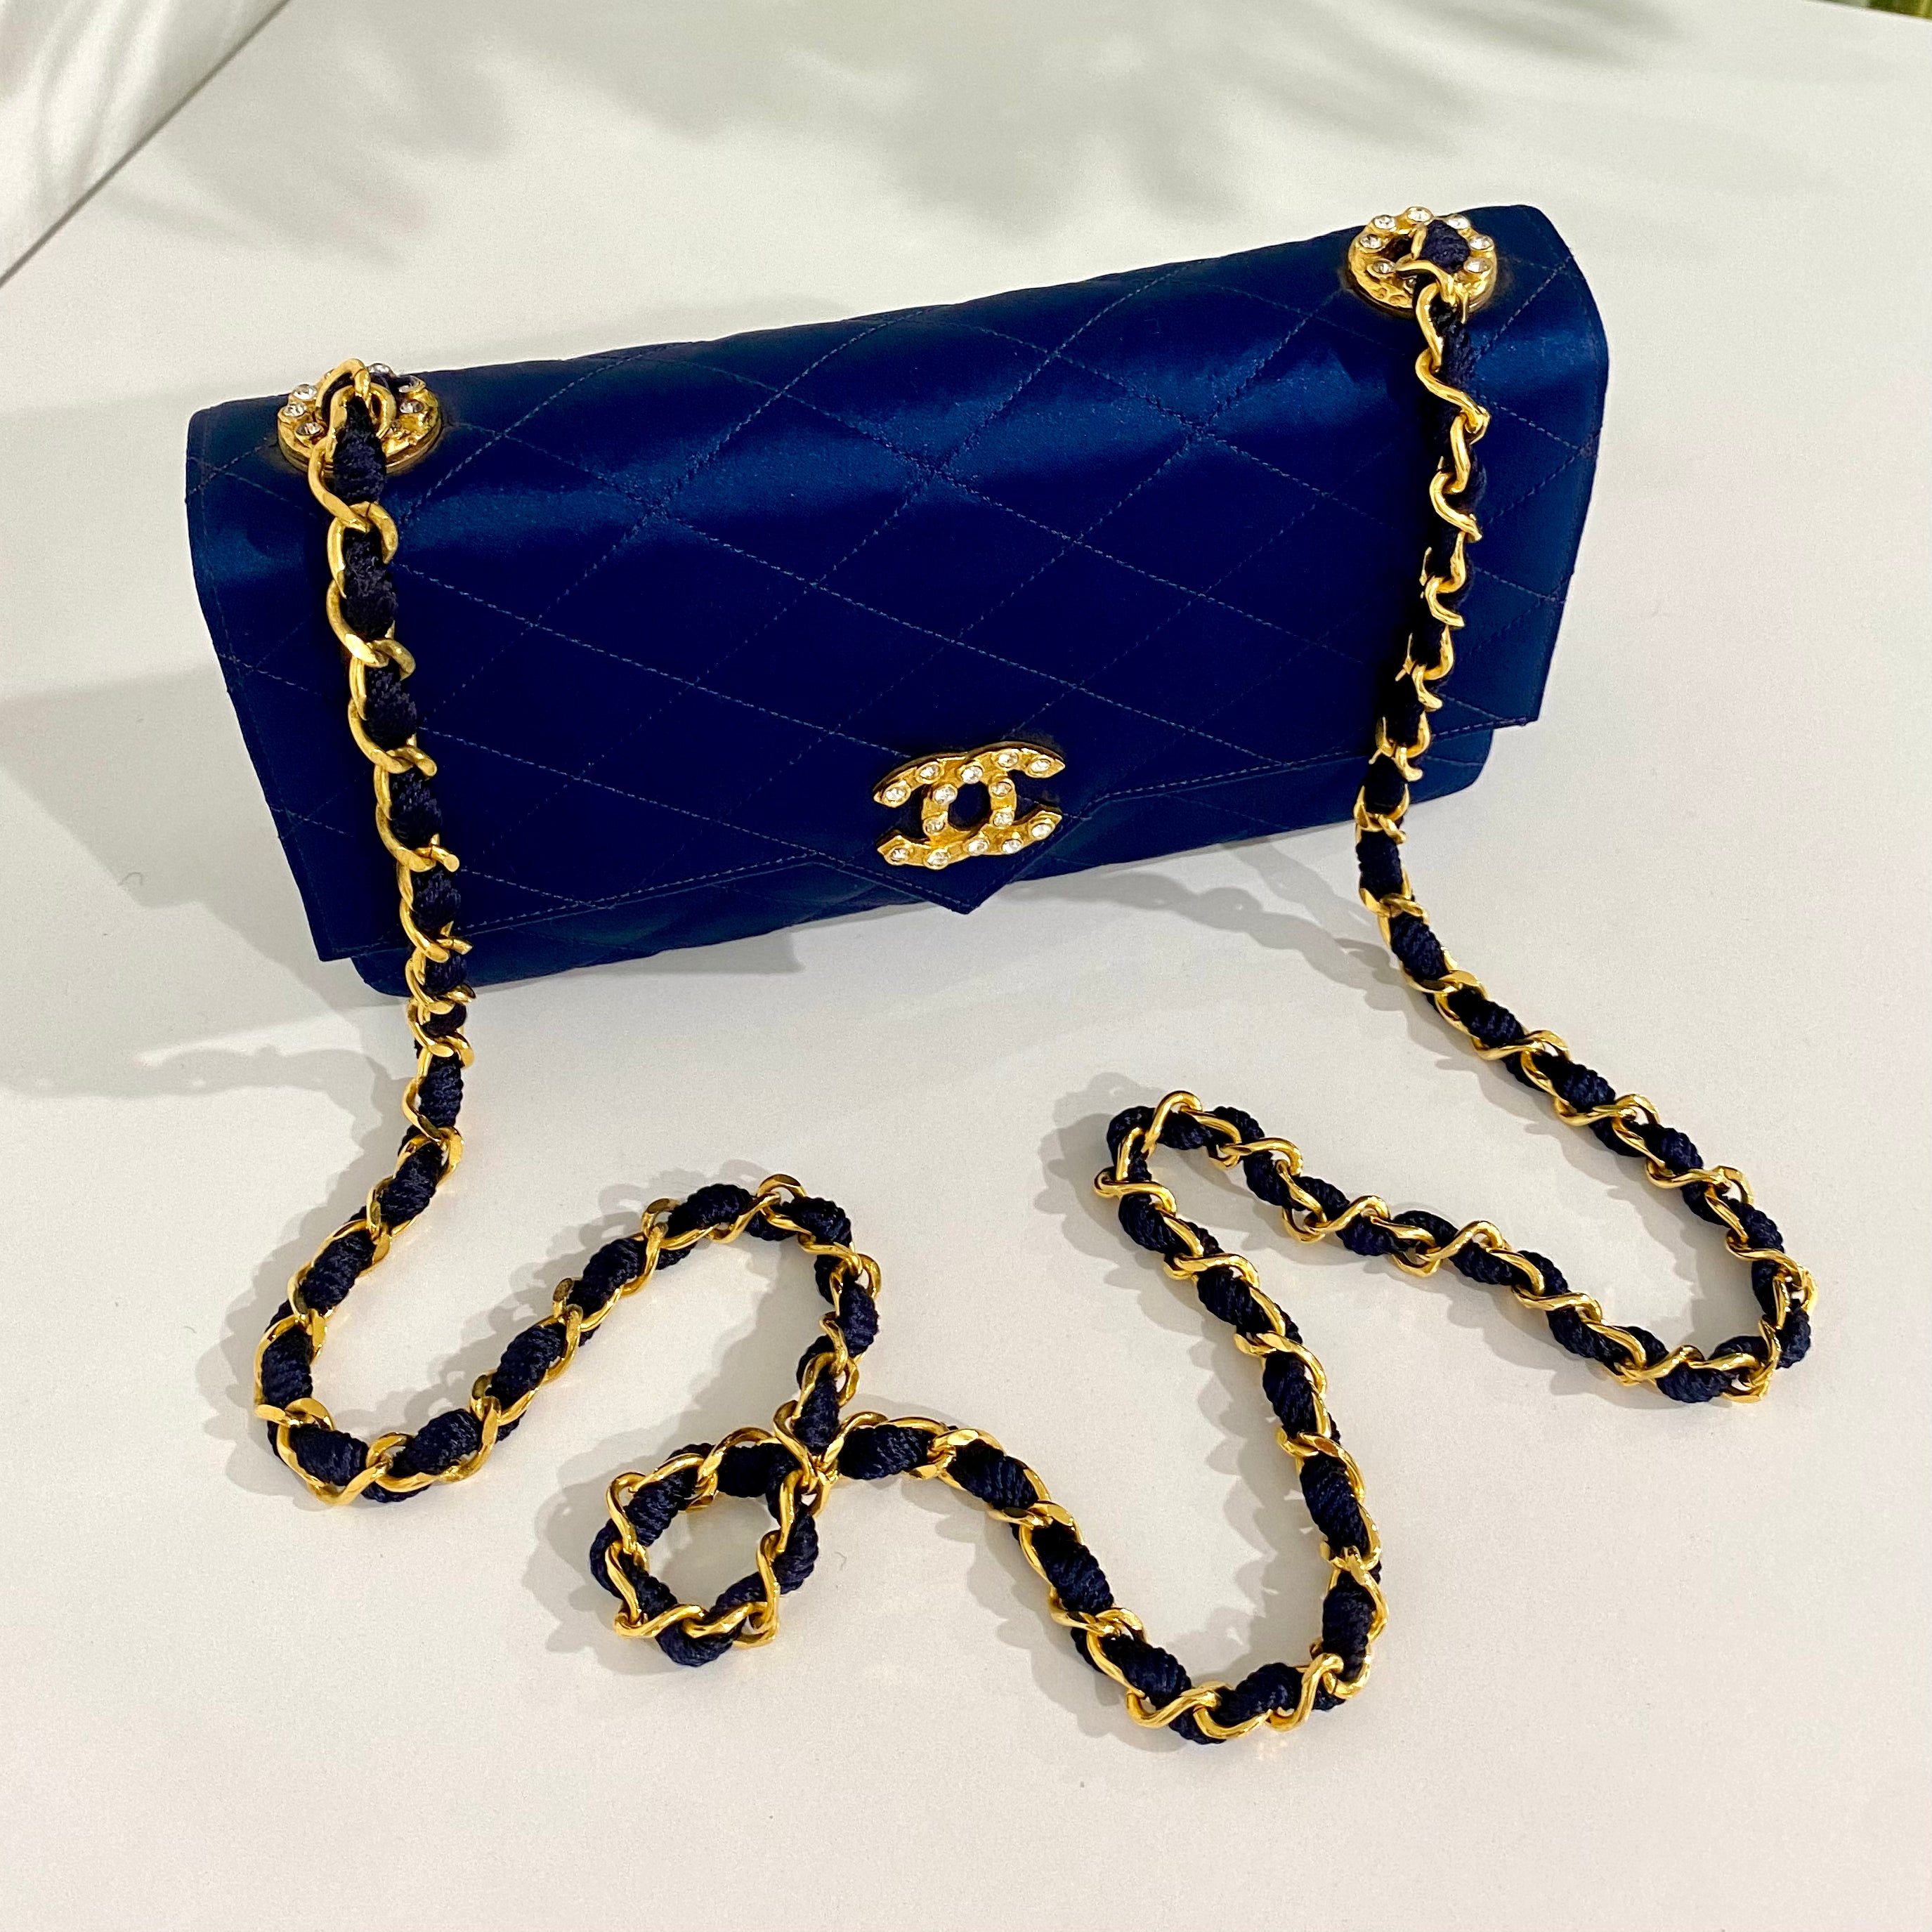 Chanel Vintage Navy Satin Evening Bag – Dina C's Fab and Funky